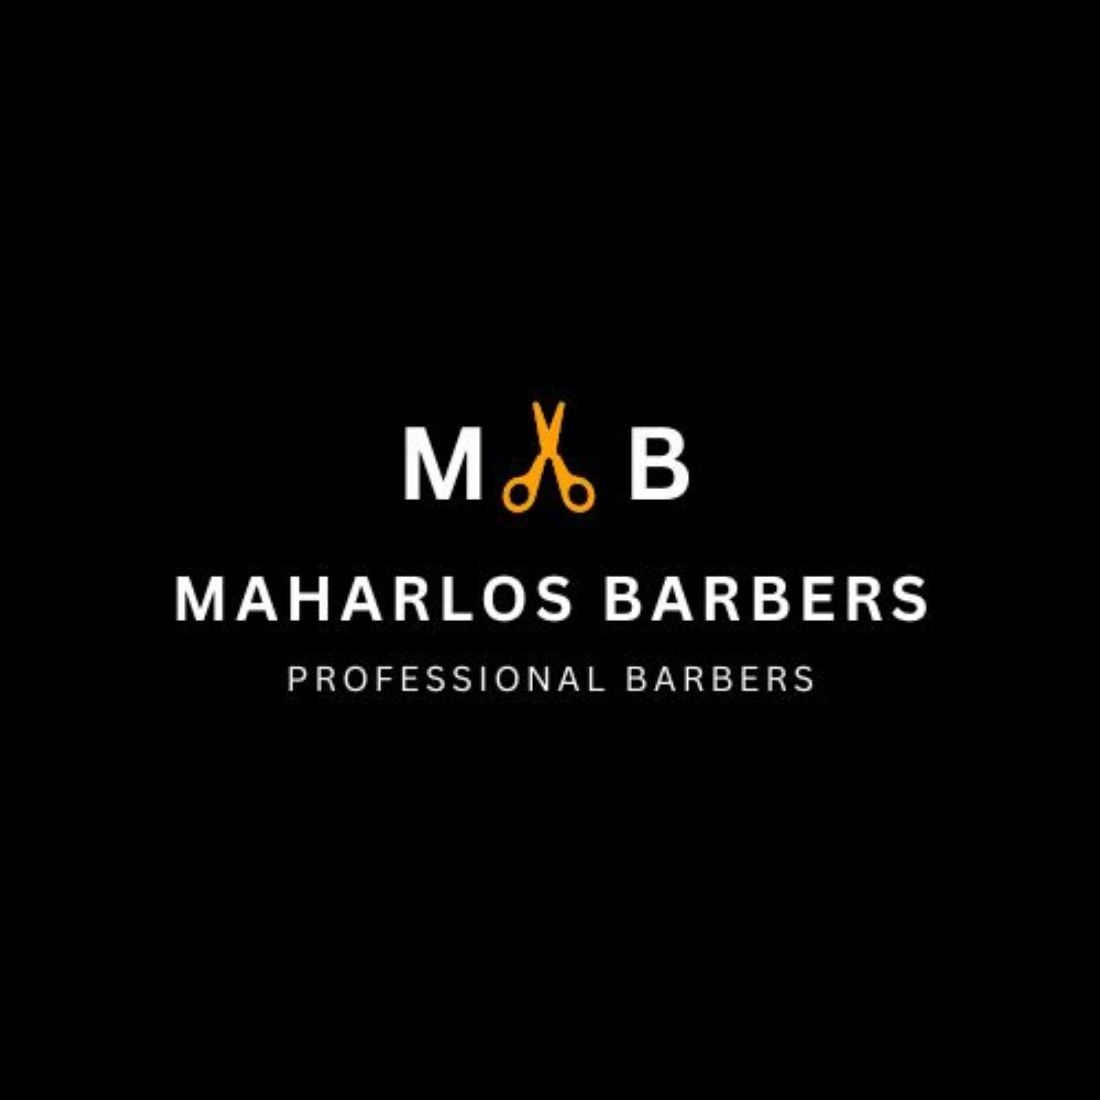 Professional Barber Logo Templates (Canva, 500x500px) cover image.